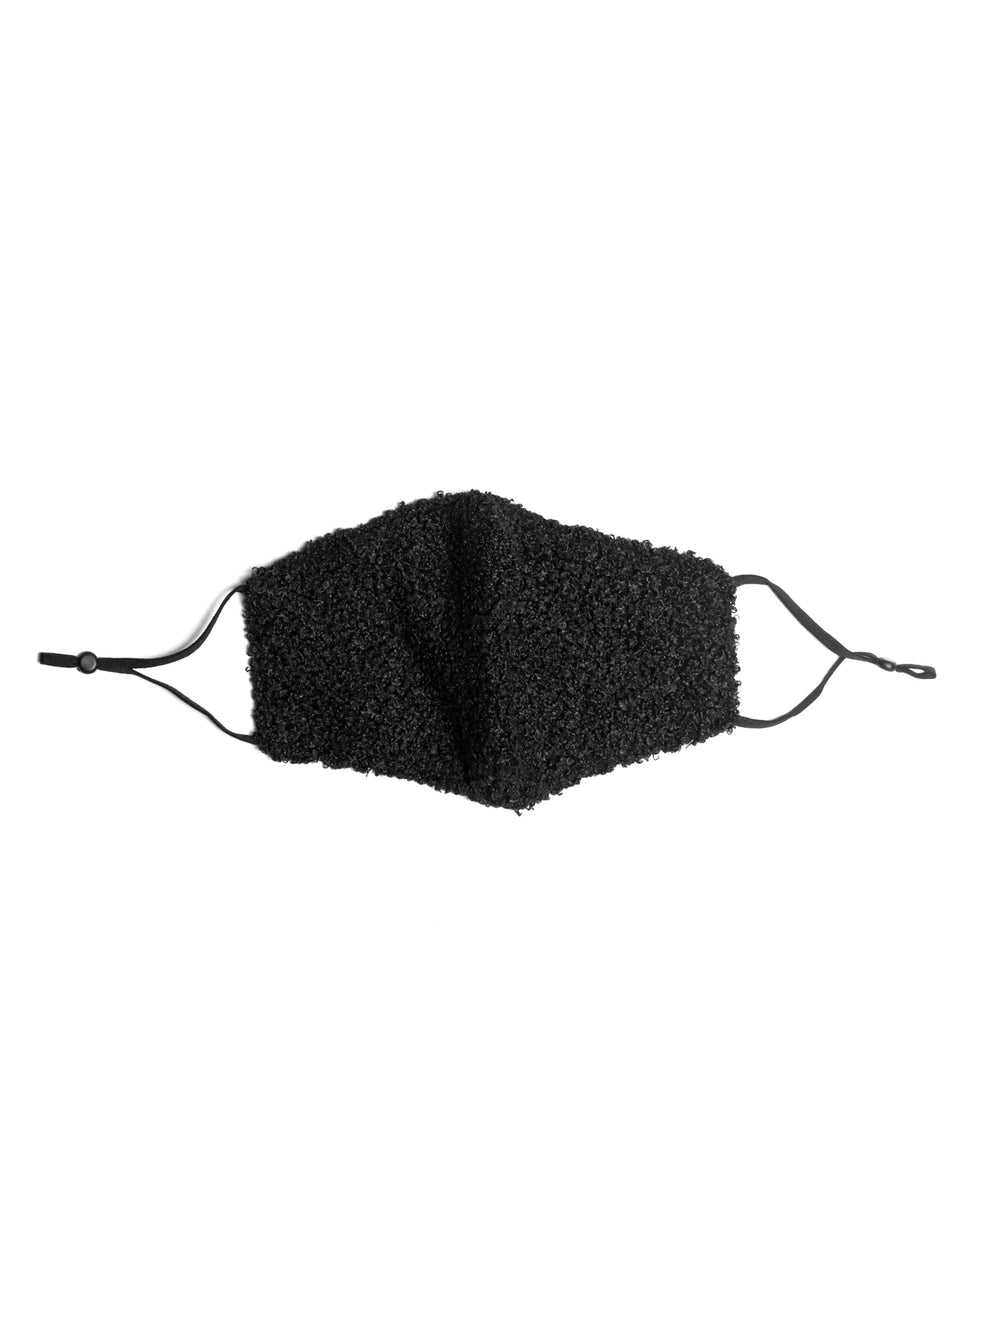 KW FASHION CORP TEDDY MASK - BLACK - CLEARANCE